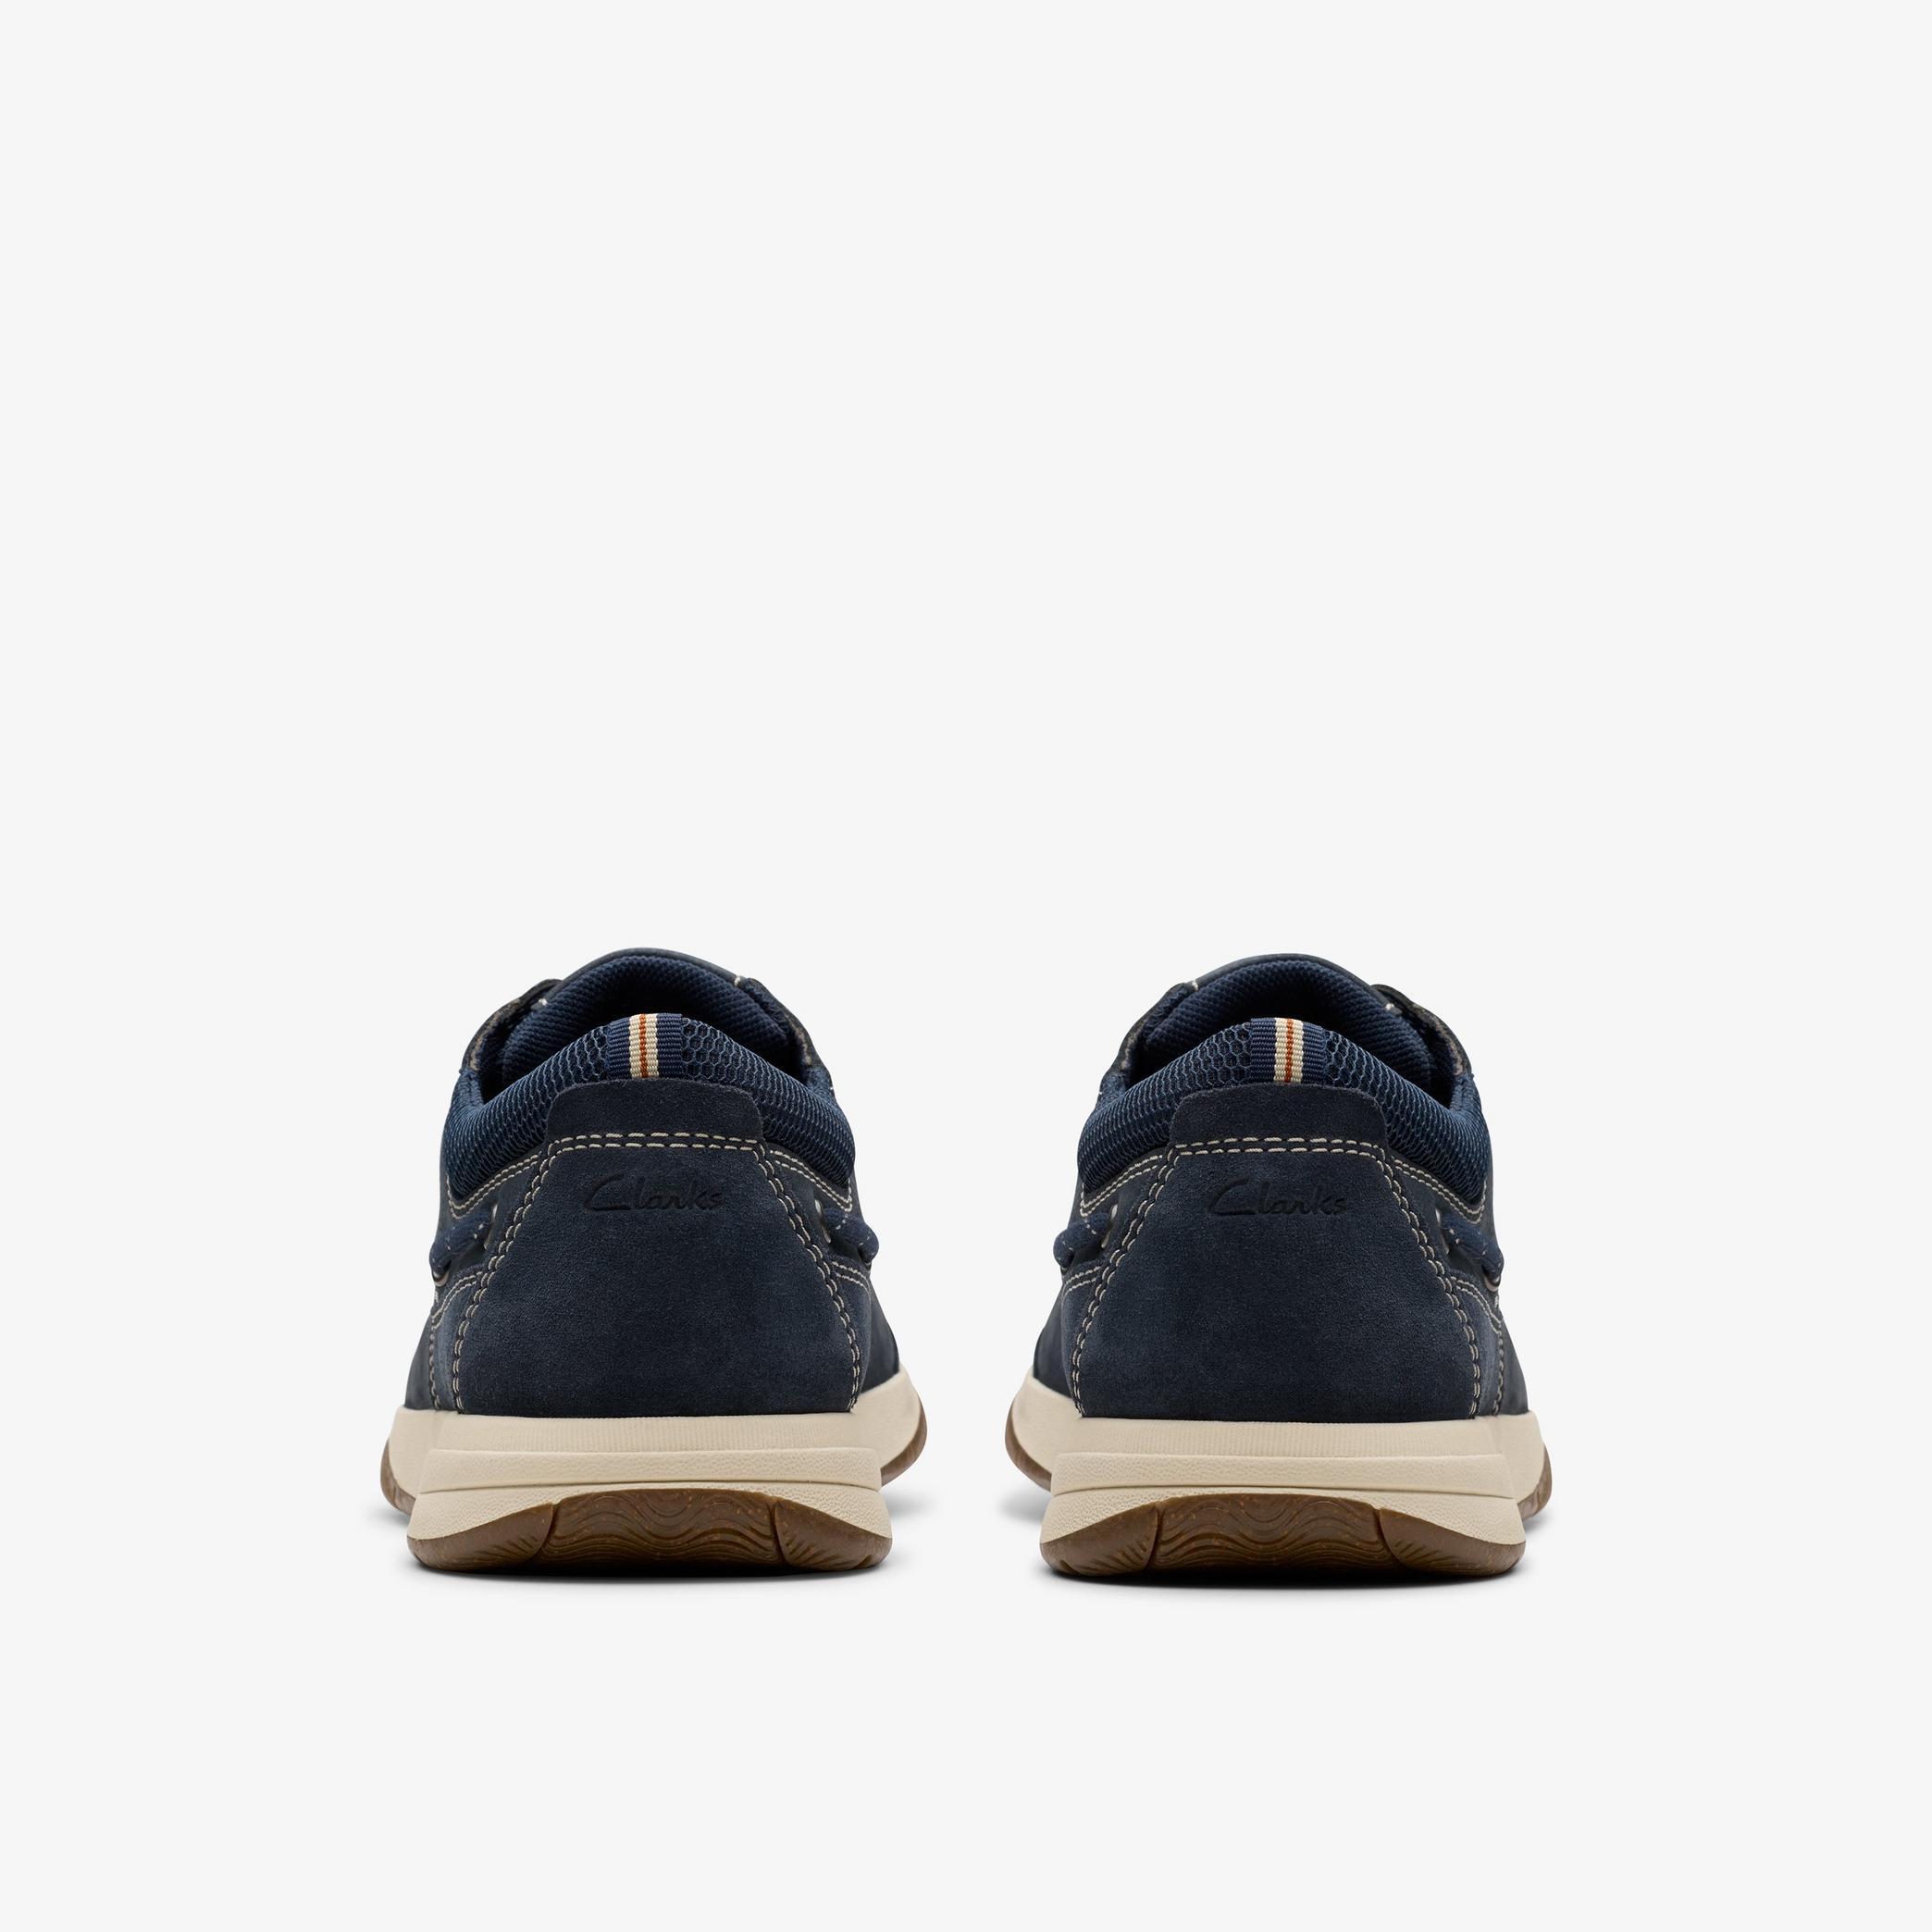 Sailview Lace Navy Nubuck Boat Shoes, view 6 of 8